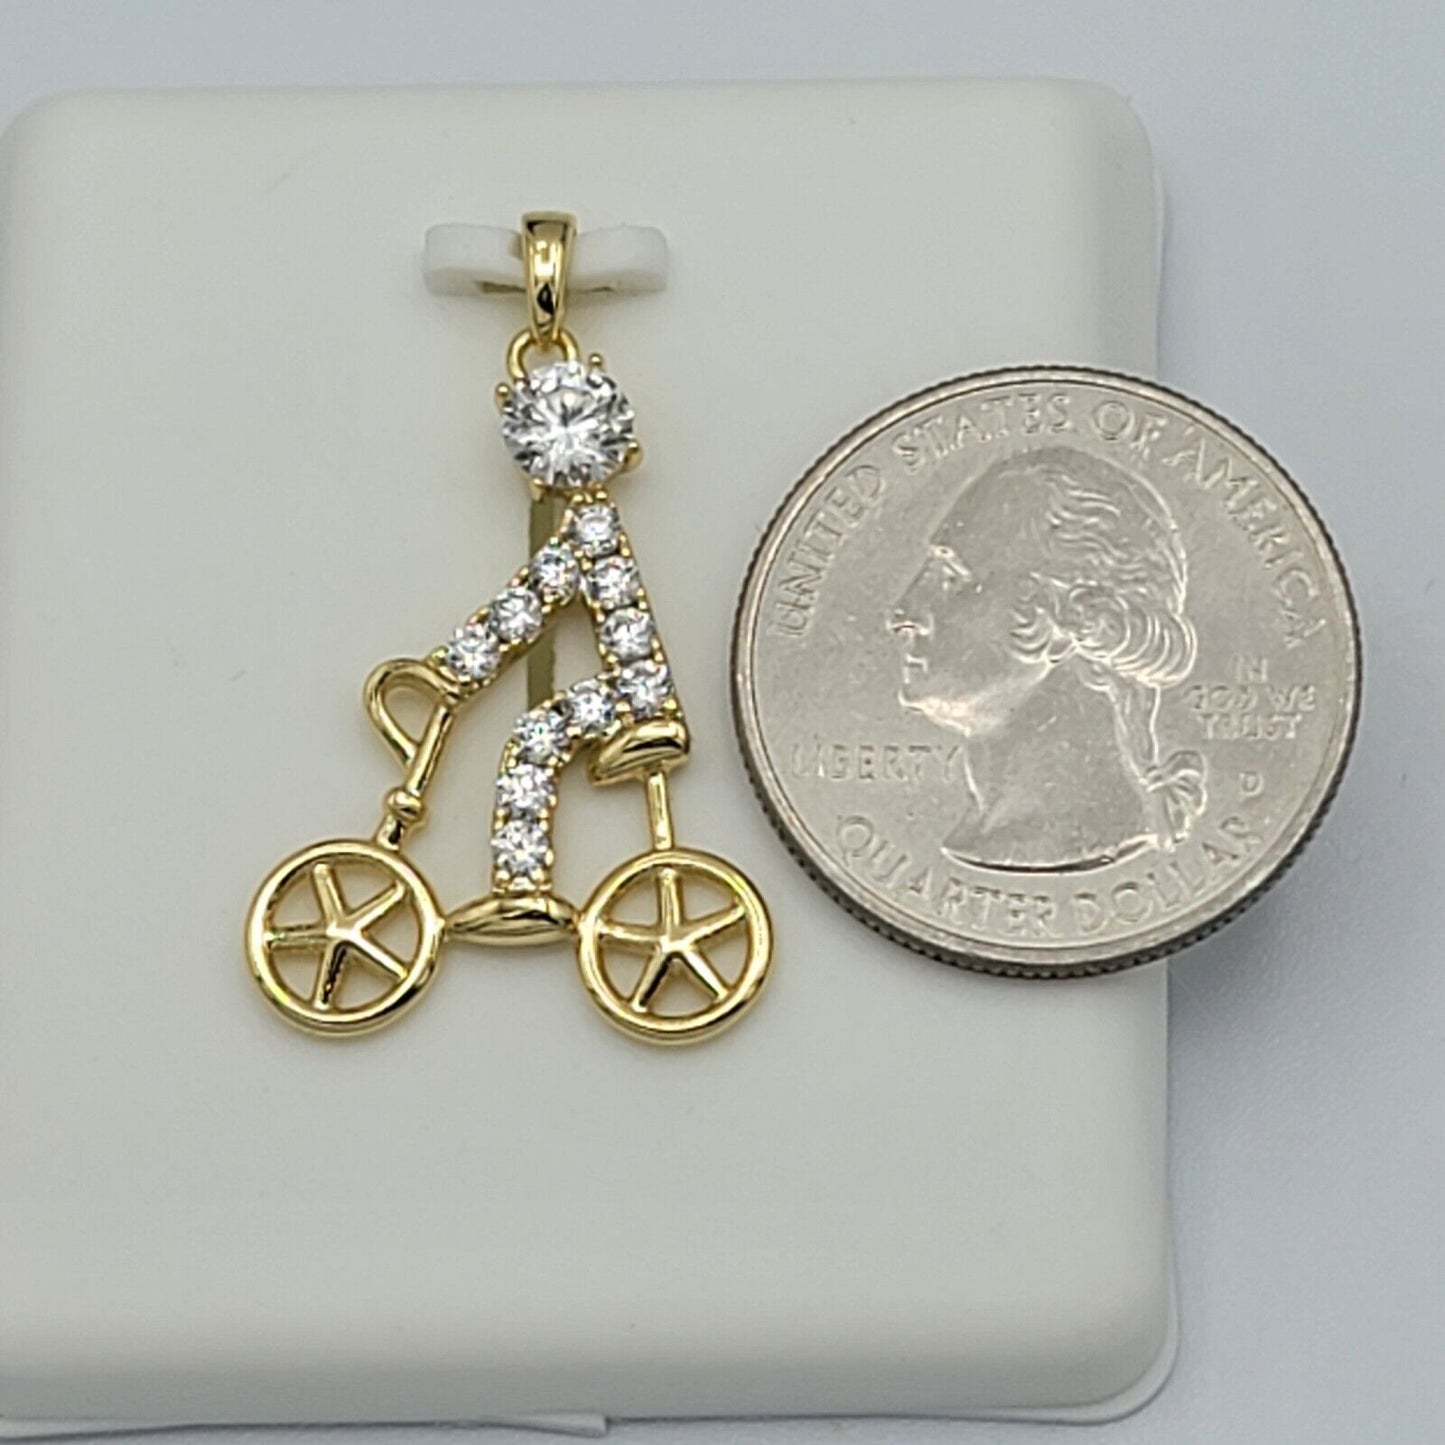 Necklaces - 14K Gold Plated. Clear Crystals Bicycle Bike Pendant & Chain.